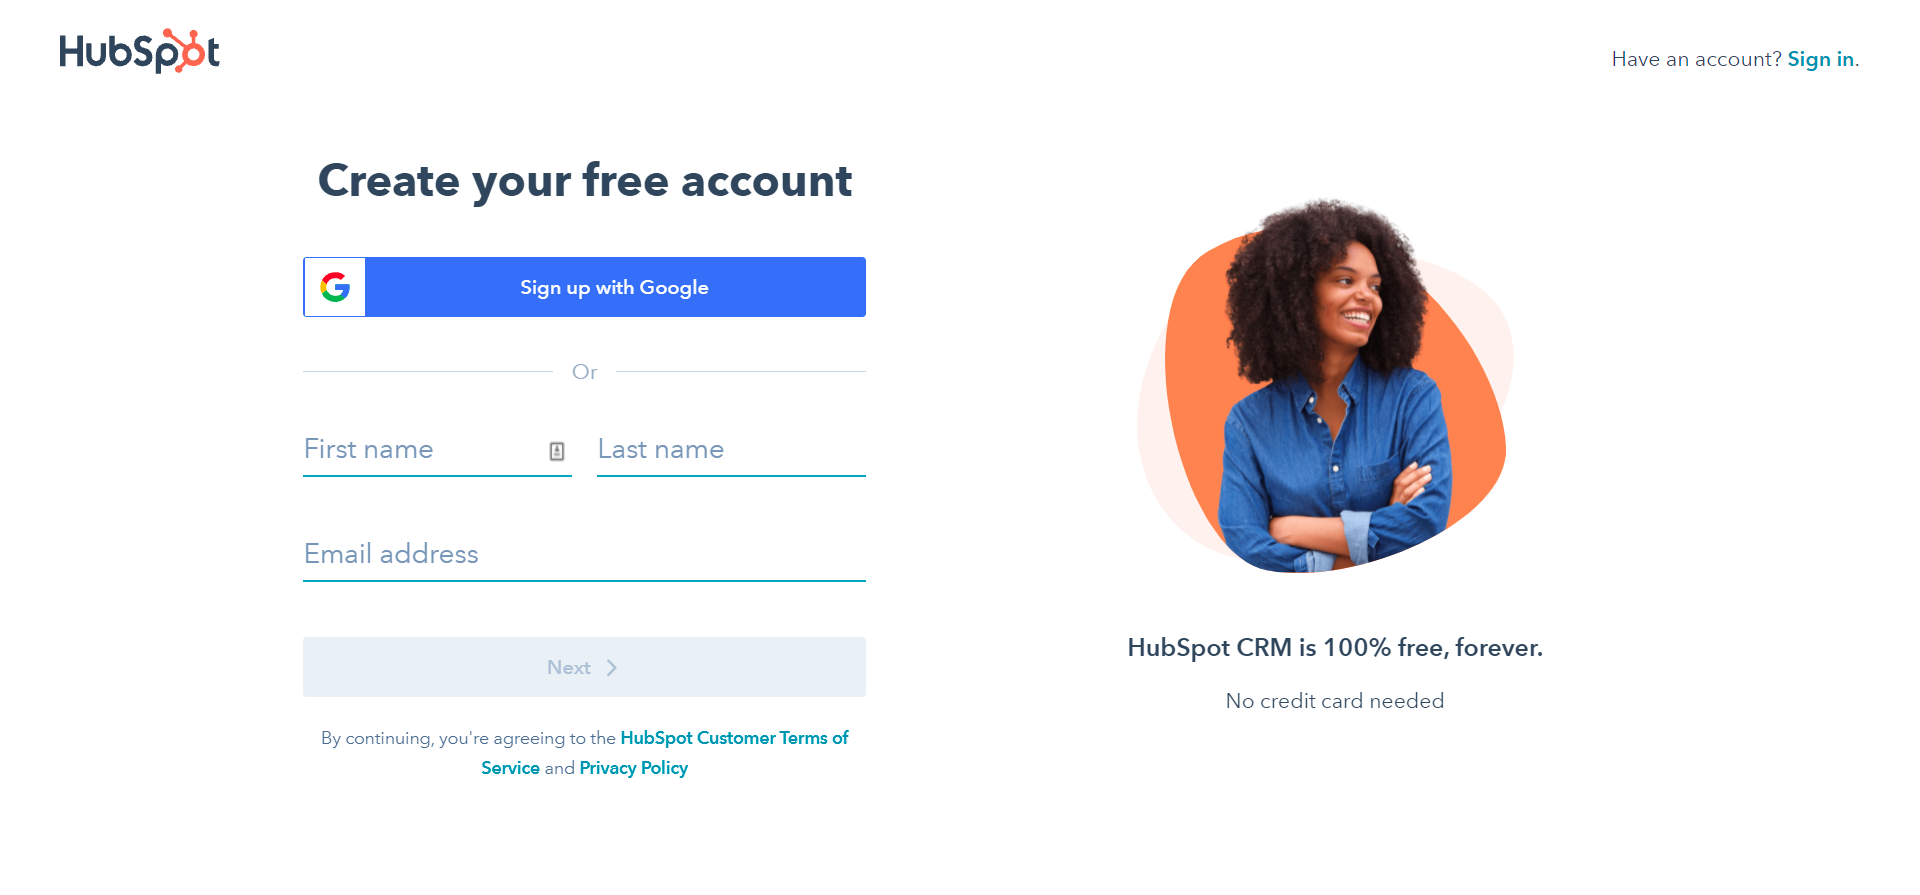 Interface for creating a free HubSpot account